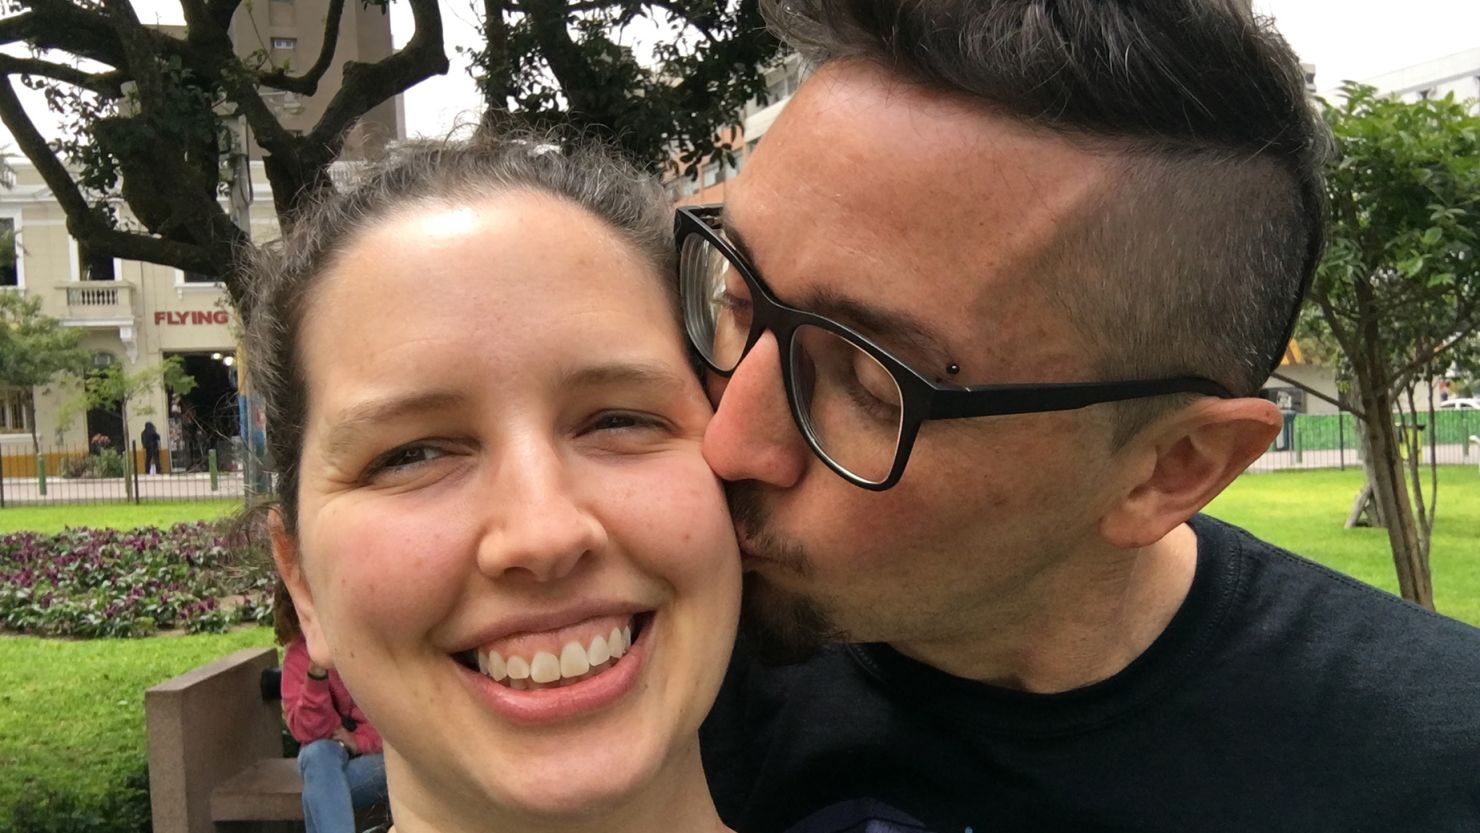 Amelia Showalter and Lucas Demaria crossed paths at a whisky bar in Edinburgh on vacation. Next thing they knew, they were embarking on a ghost tour together, kickstarting a series of unexpected events.